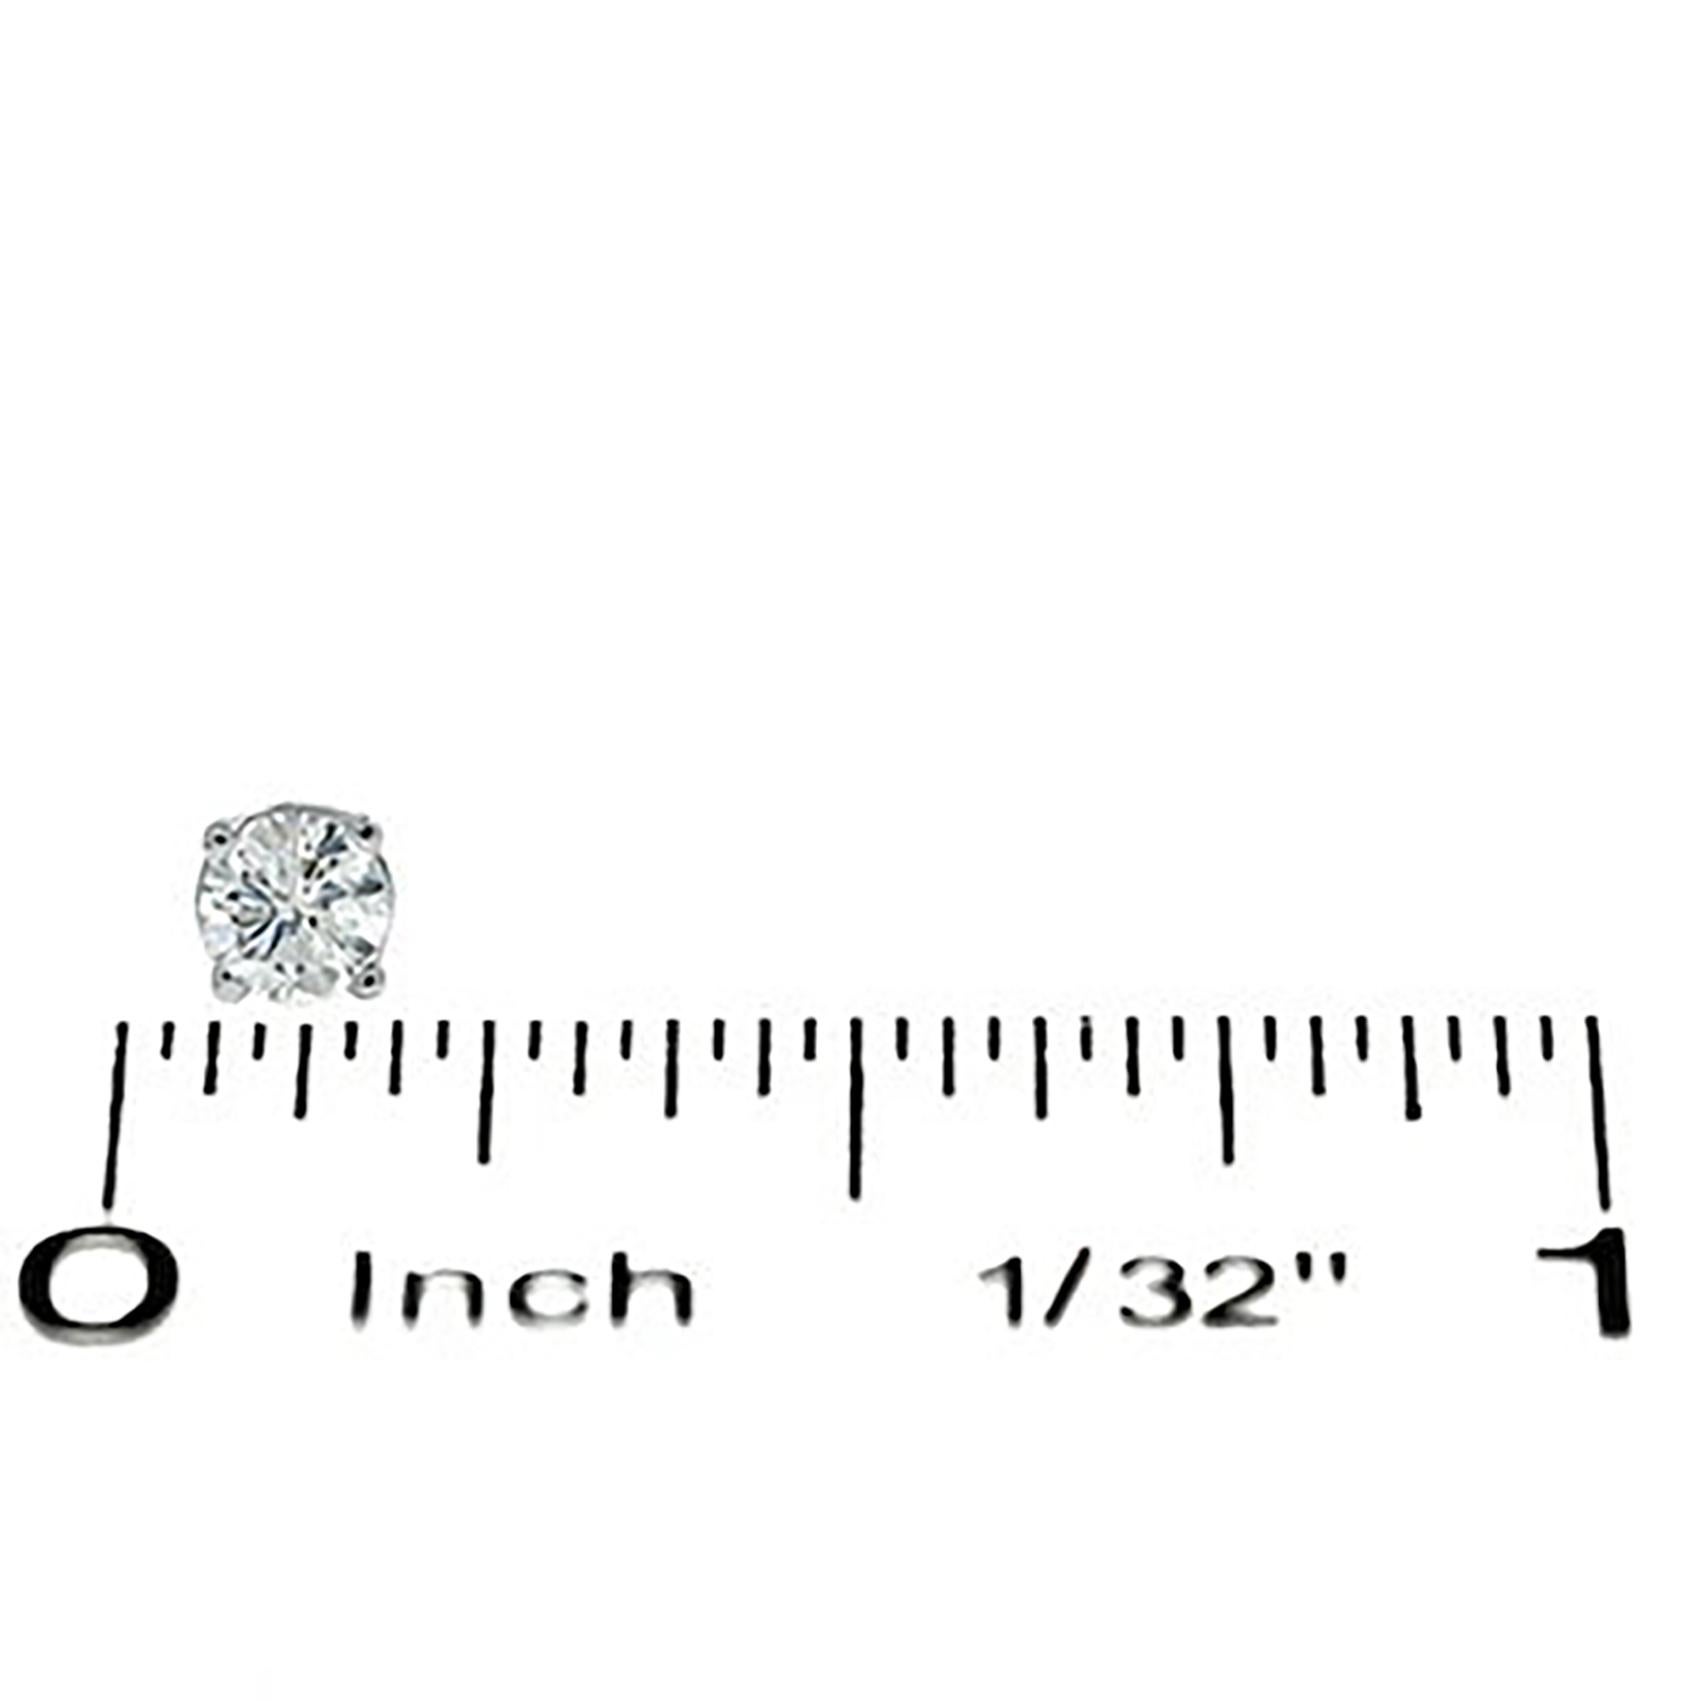 Stunning  3/8 CT. T.W. Diamond Solitaire Stud Earrings in 14K White Gold

Your look isn't complete without these classic diamond solitaire stud earrings. Created in 14K white gold, each earring showcases a sparkling diamond solitaire. Radiant with